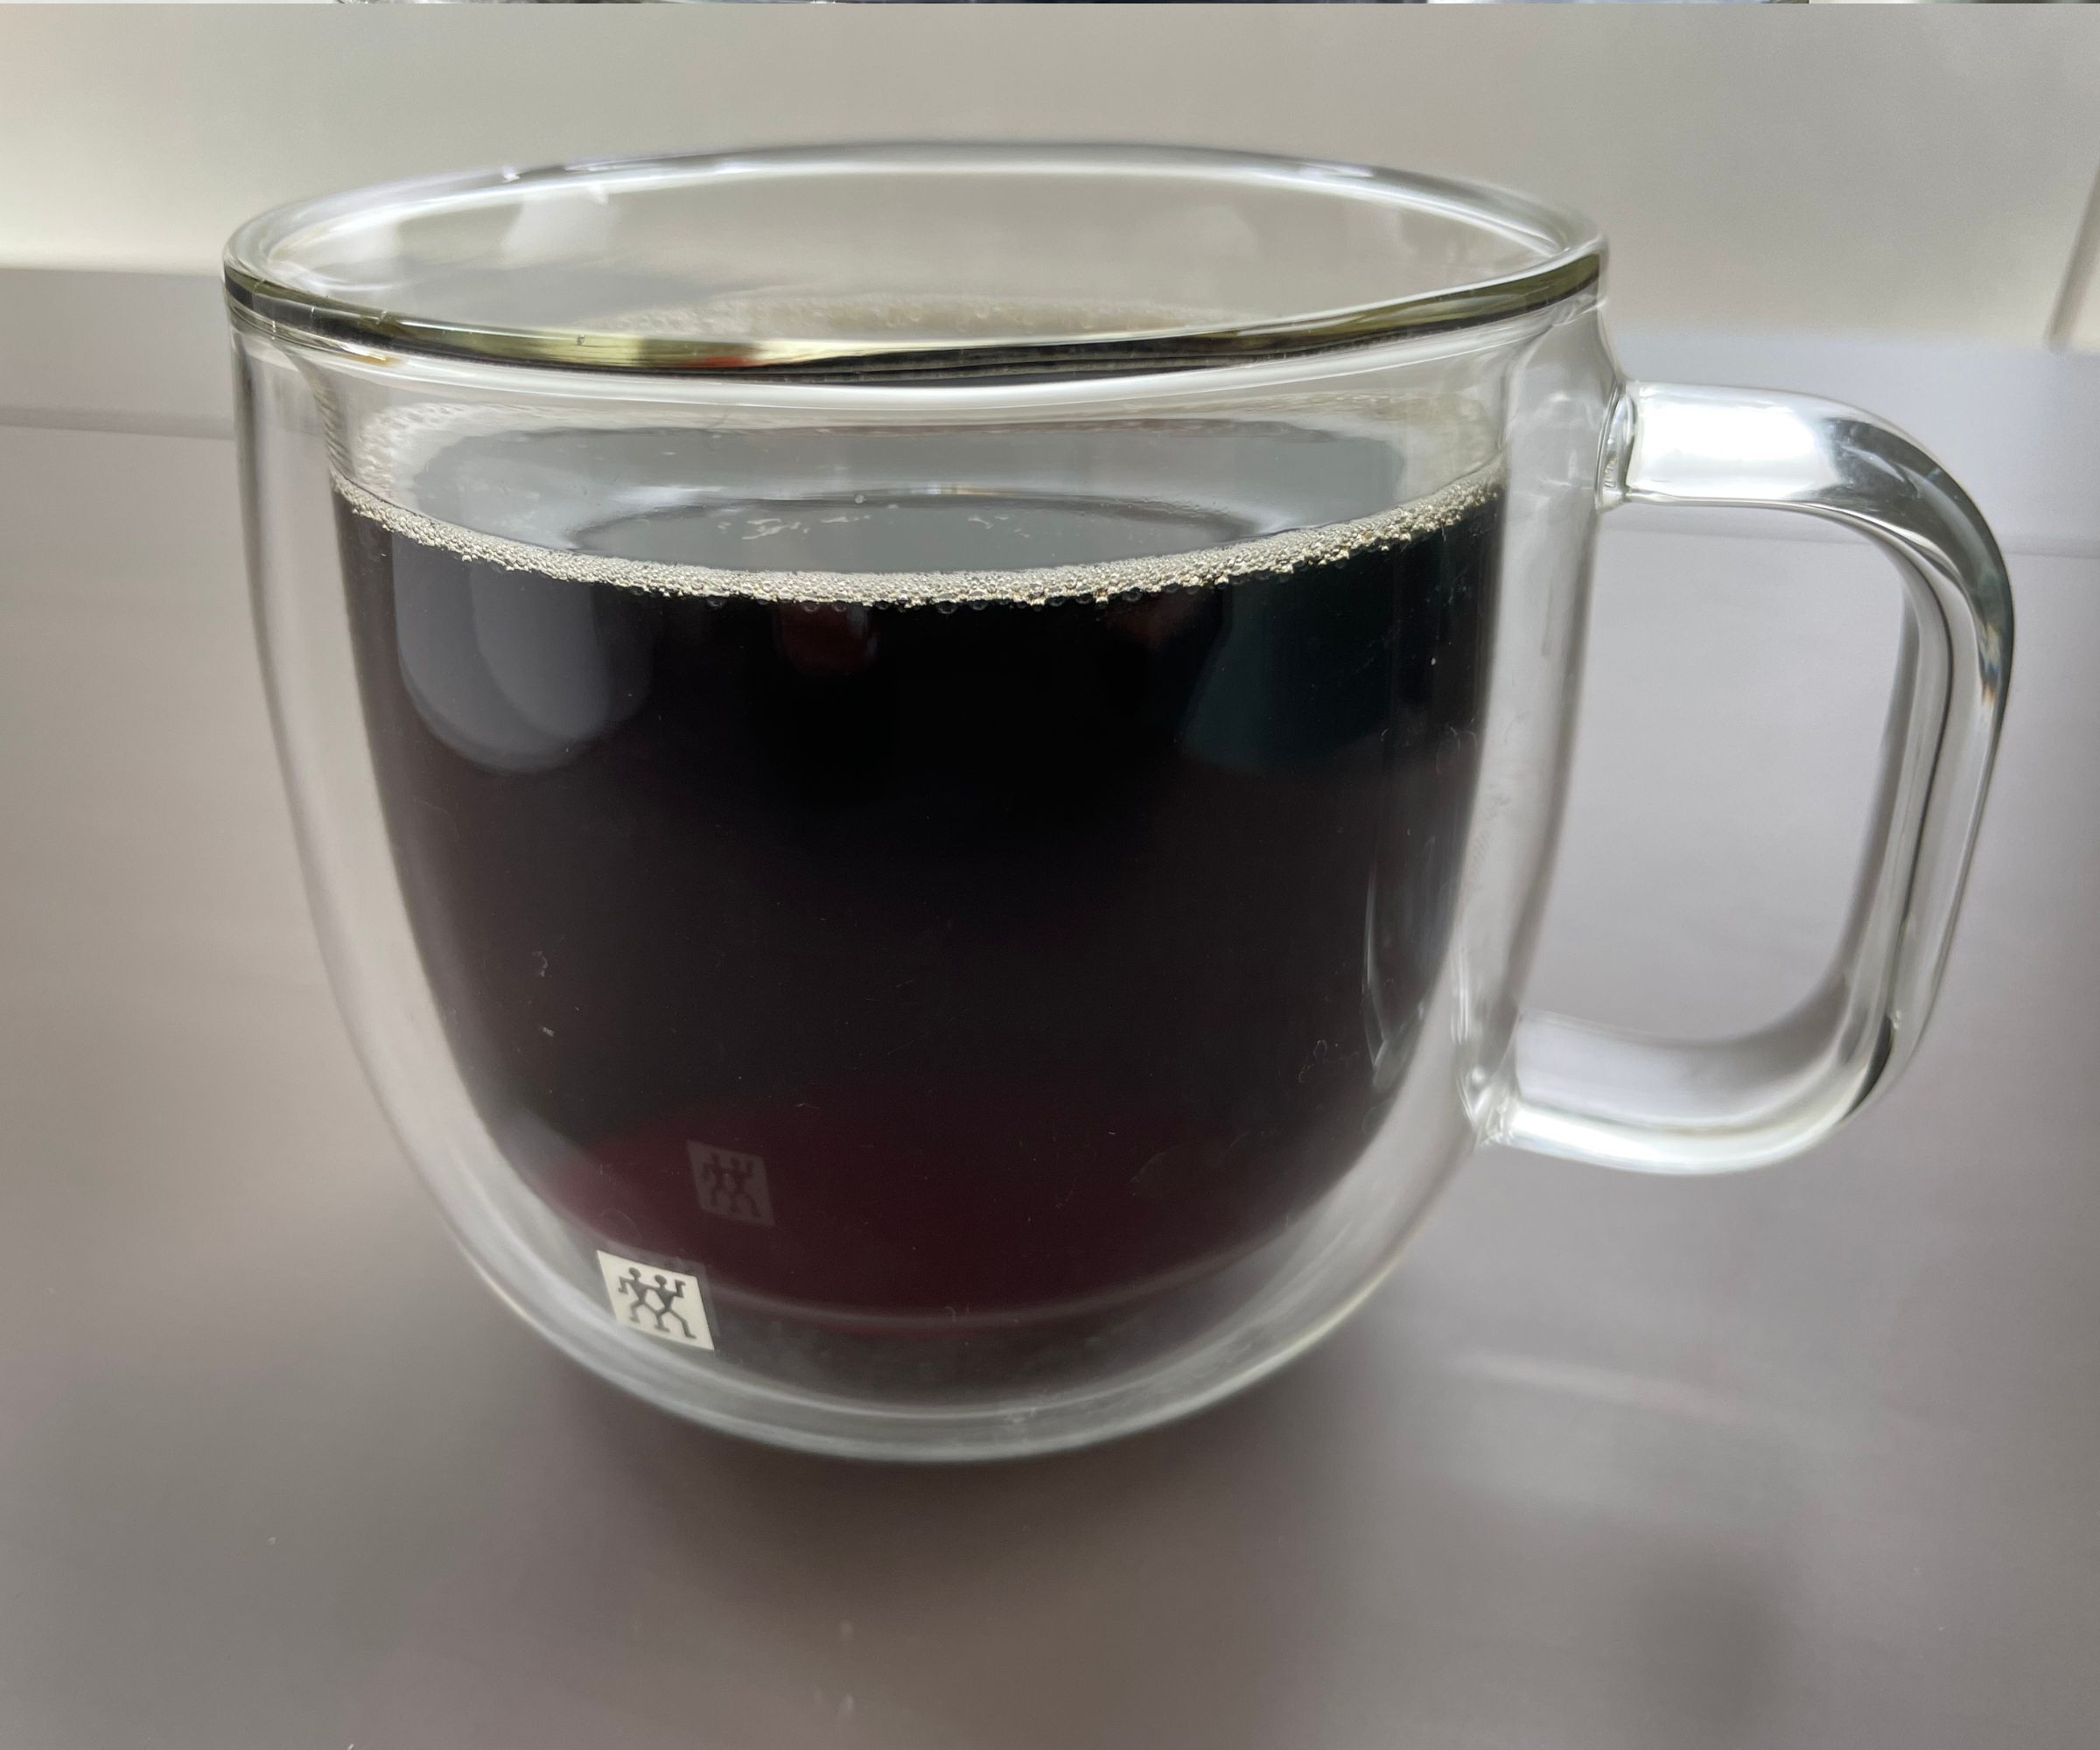 A cup of coffee made using The Ultimate AeroPress Recipe